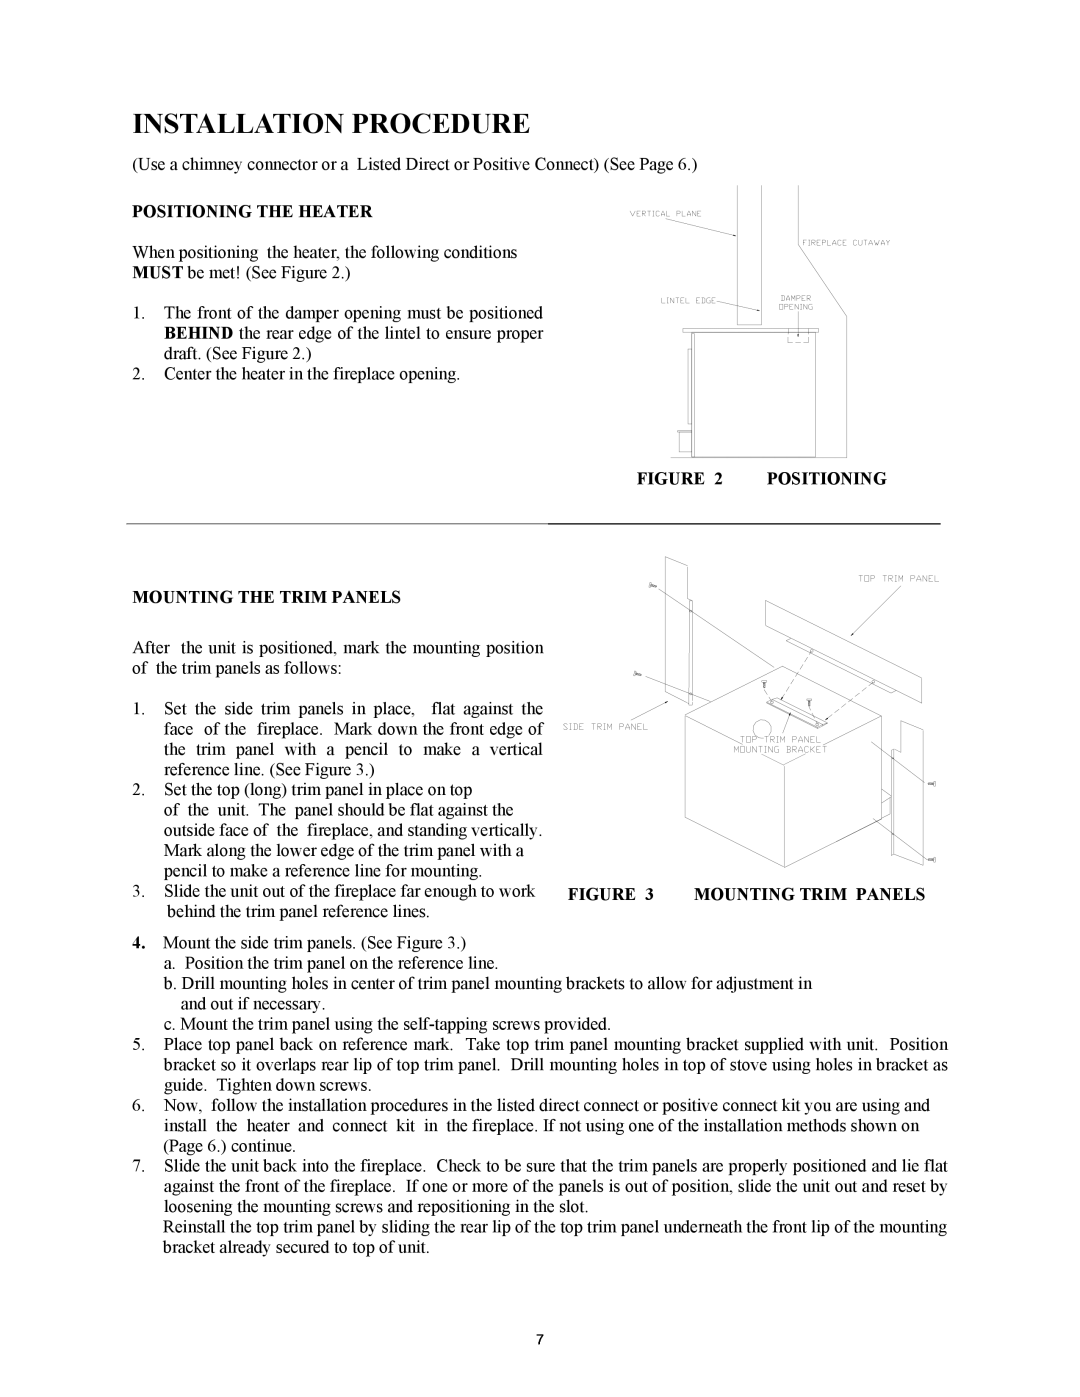 New Buck Corporation 74 Installation Procedure, Positioning The Heater, Mounting The Trim Panels, Mounting Trim Panels 